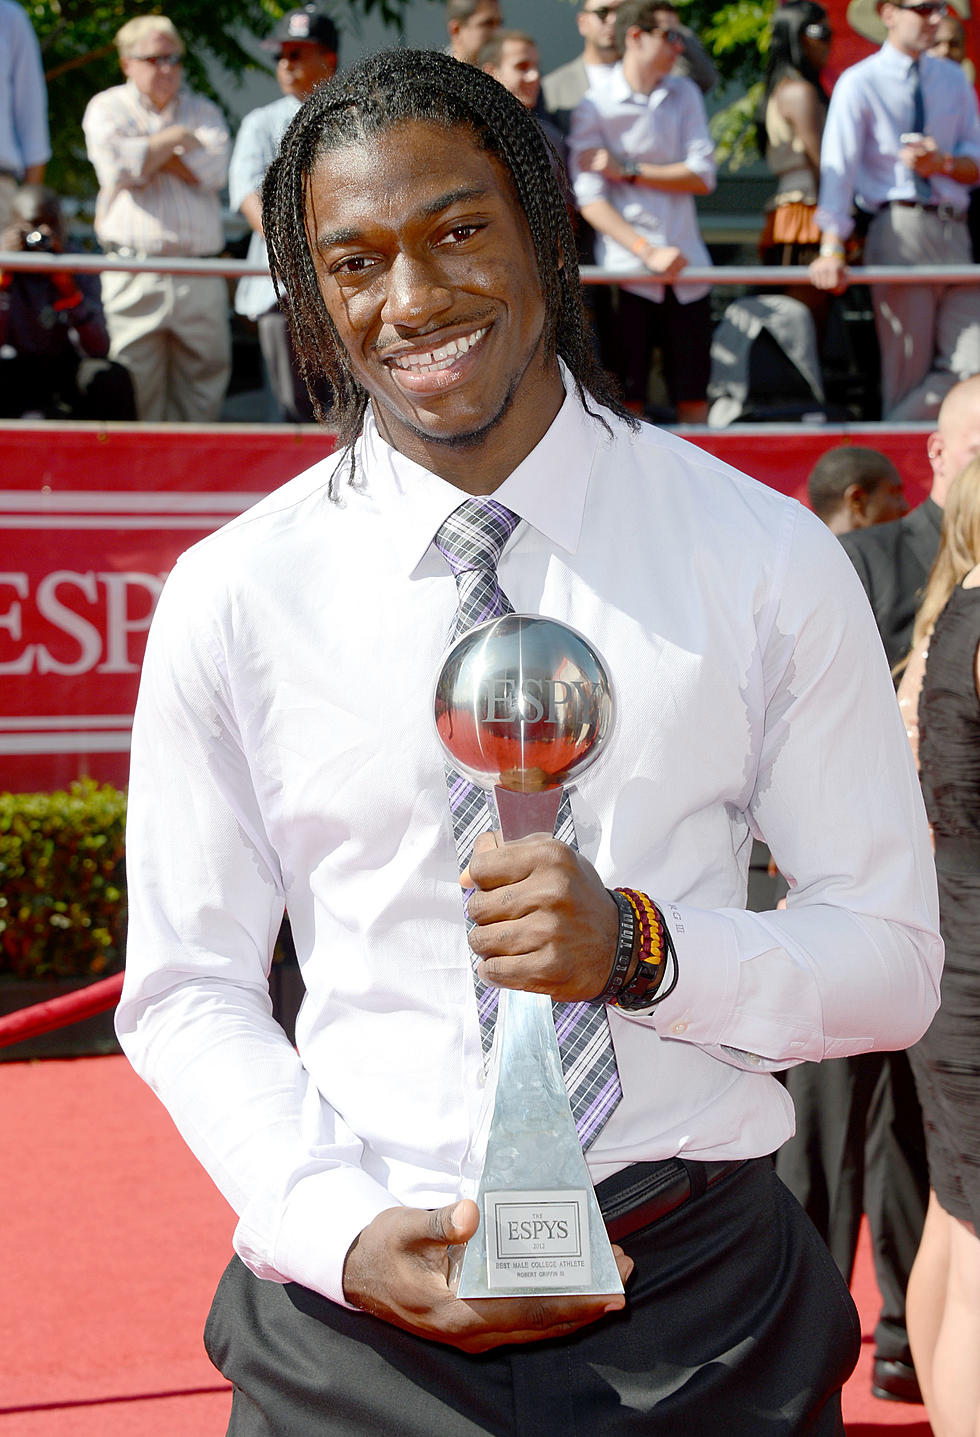 Former Baylor star, Robert Griffin III gets another NFL Shot with Baltimore Ravens